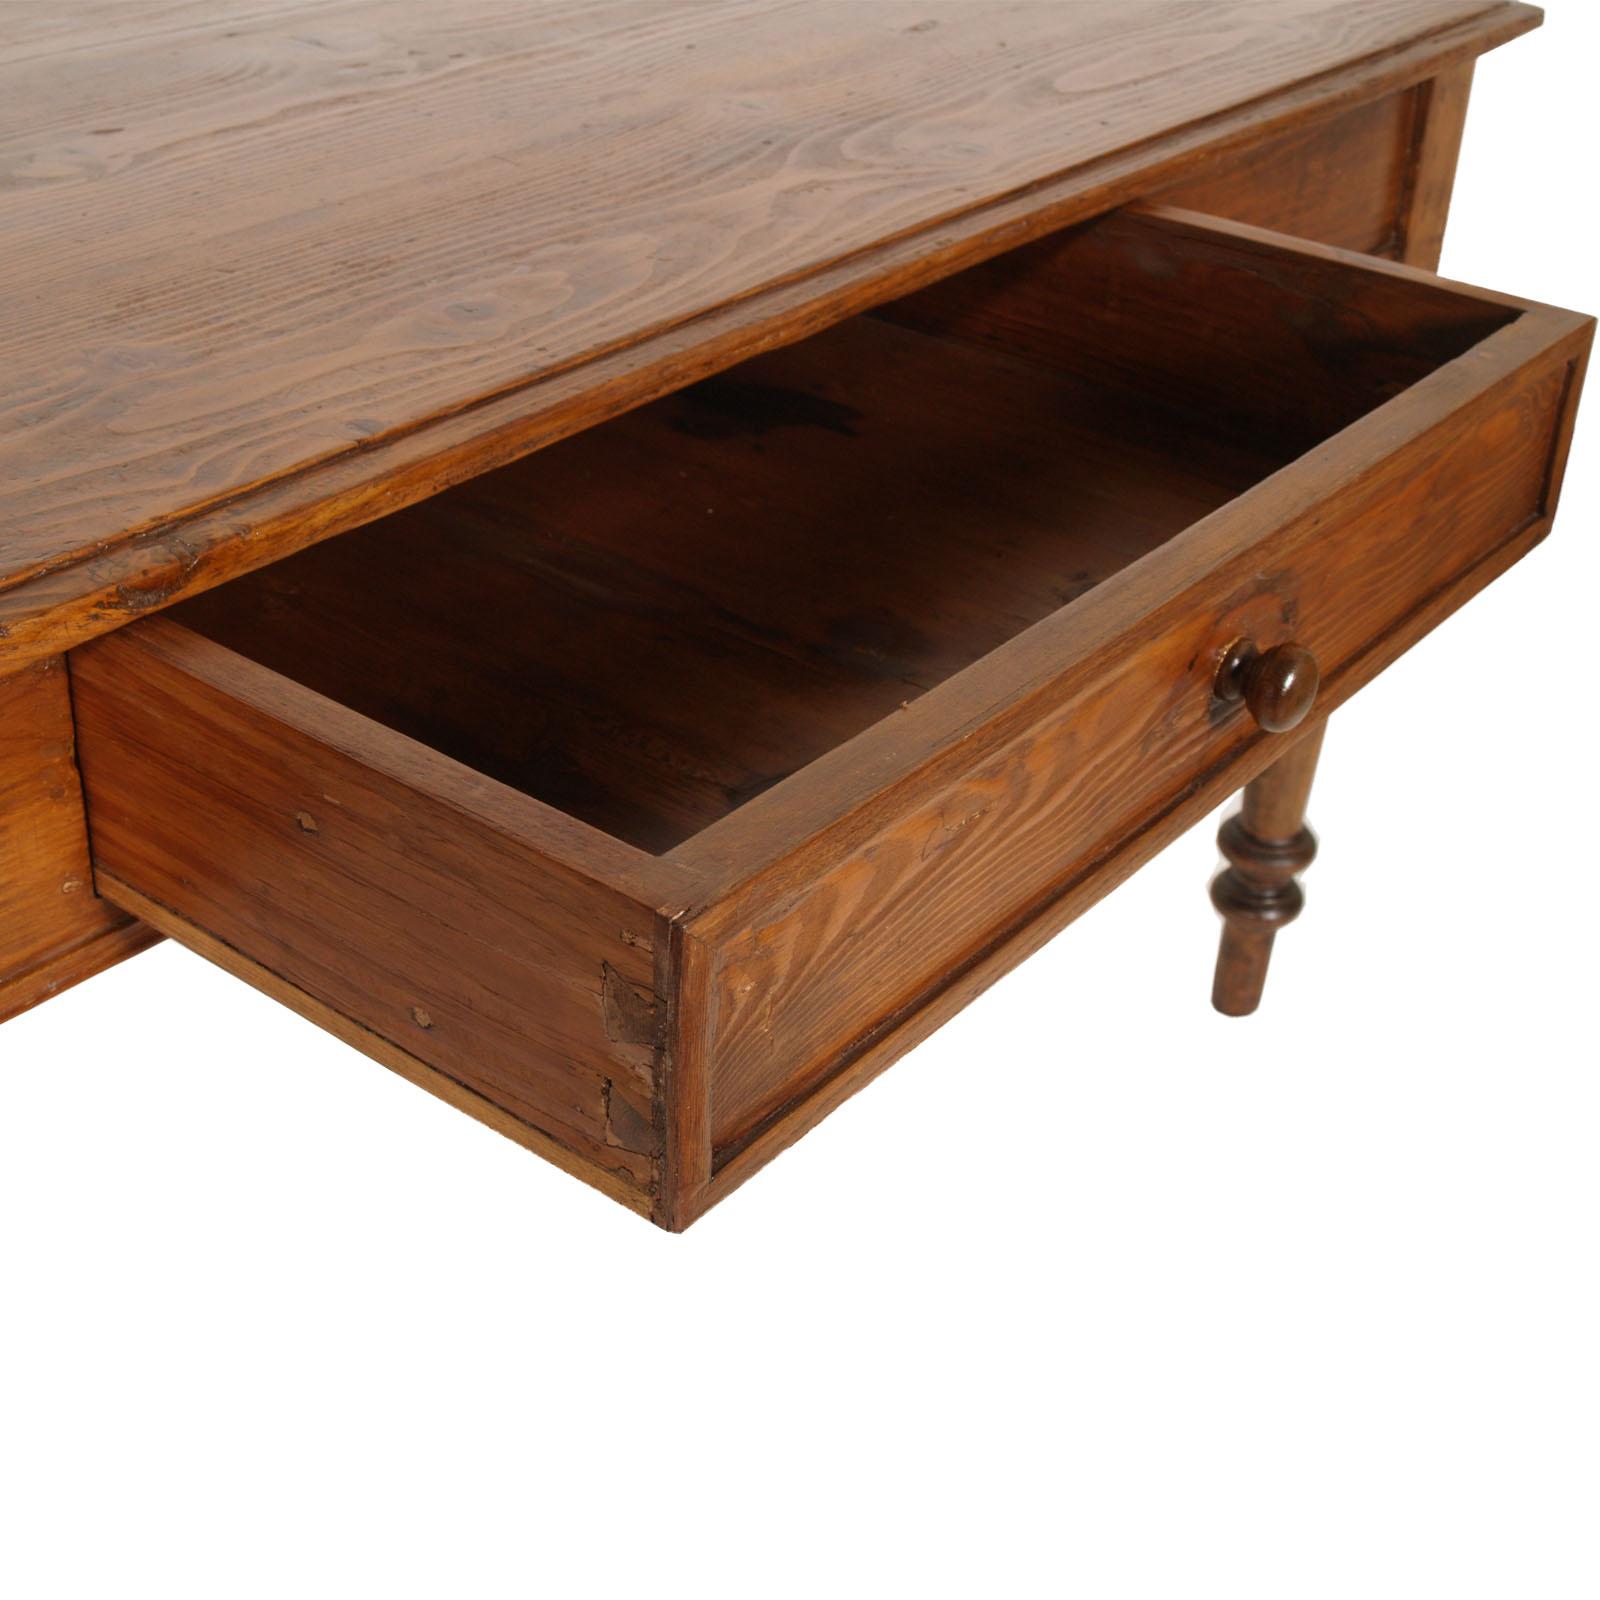 Mid-19th century Italian neoclassic one drawer table or desk in solid larch, polished to wax. An antique and experienced table indicated and suitable for a modern kitchen.
The beauty and charm of this original 19th century table embellishes any